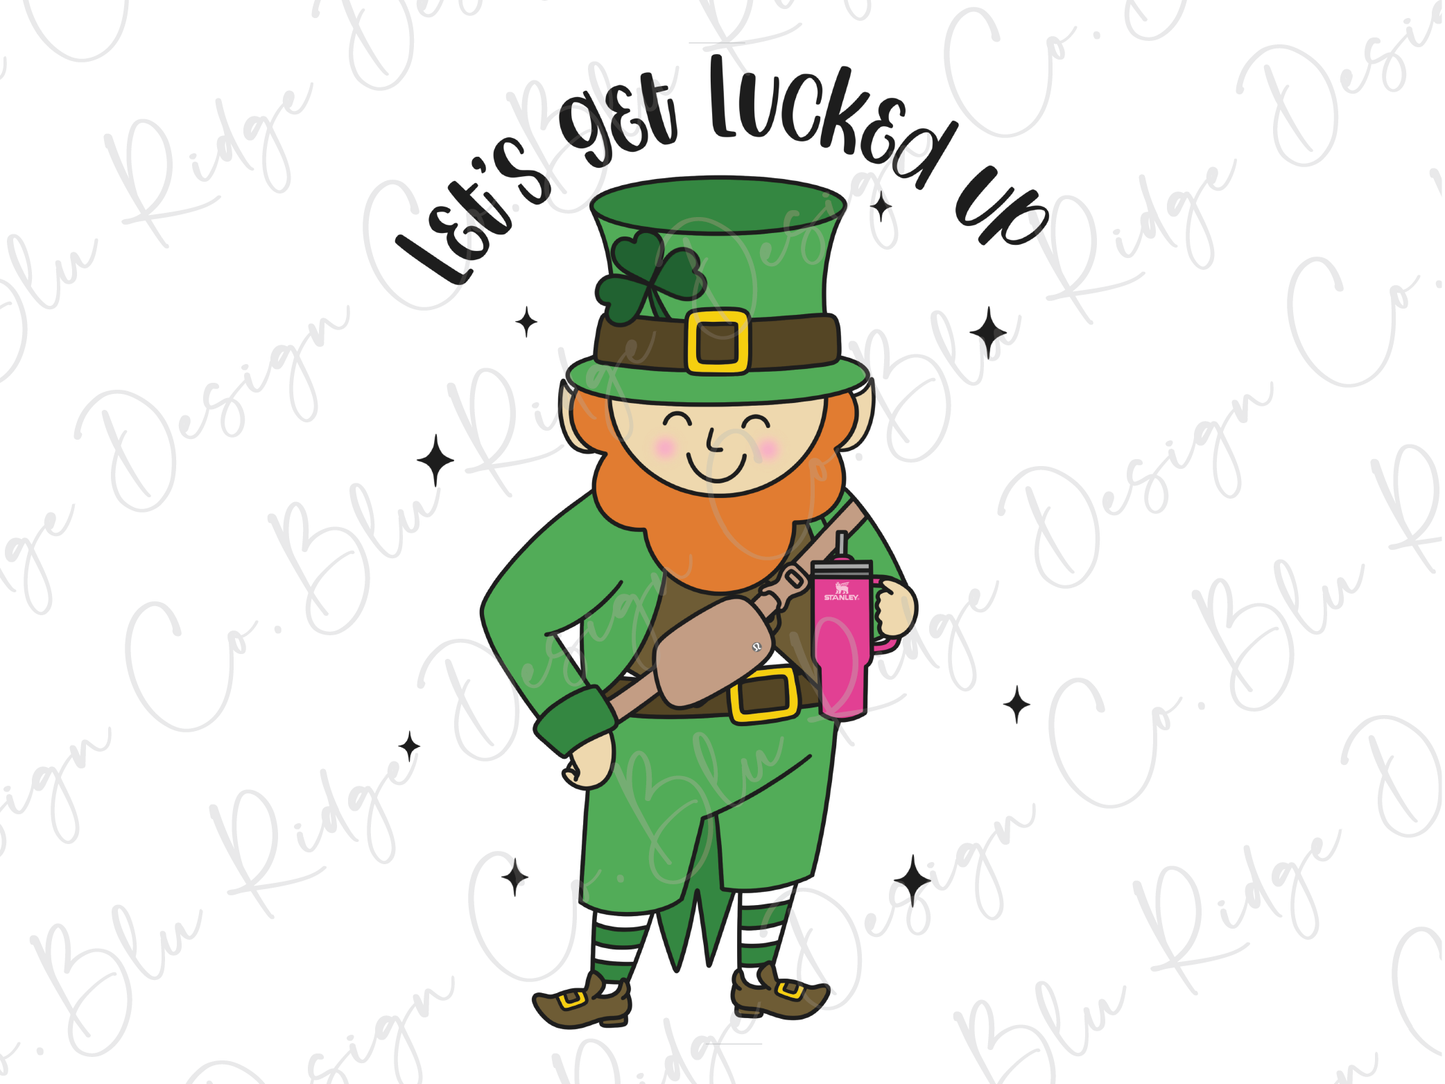 a st patrick's day st patrick's day lepreite with a